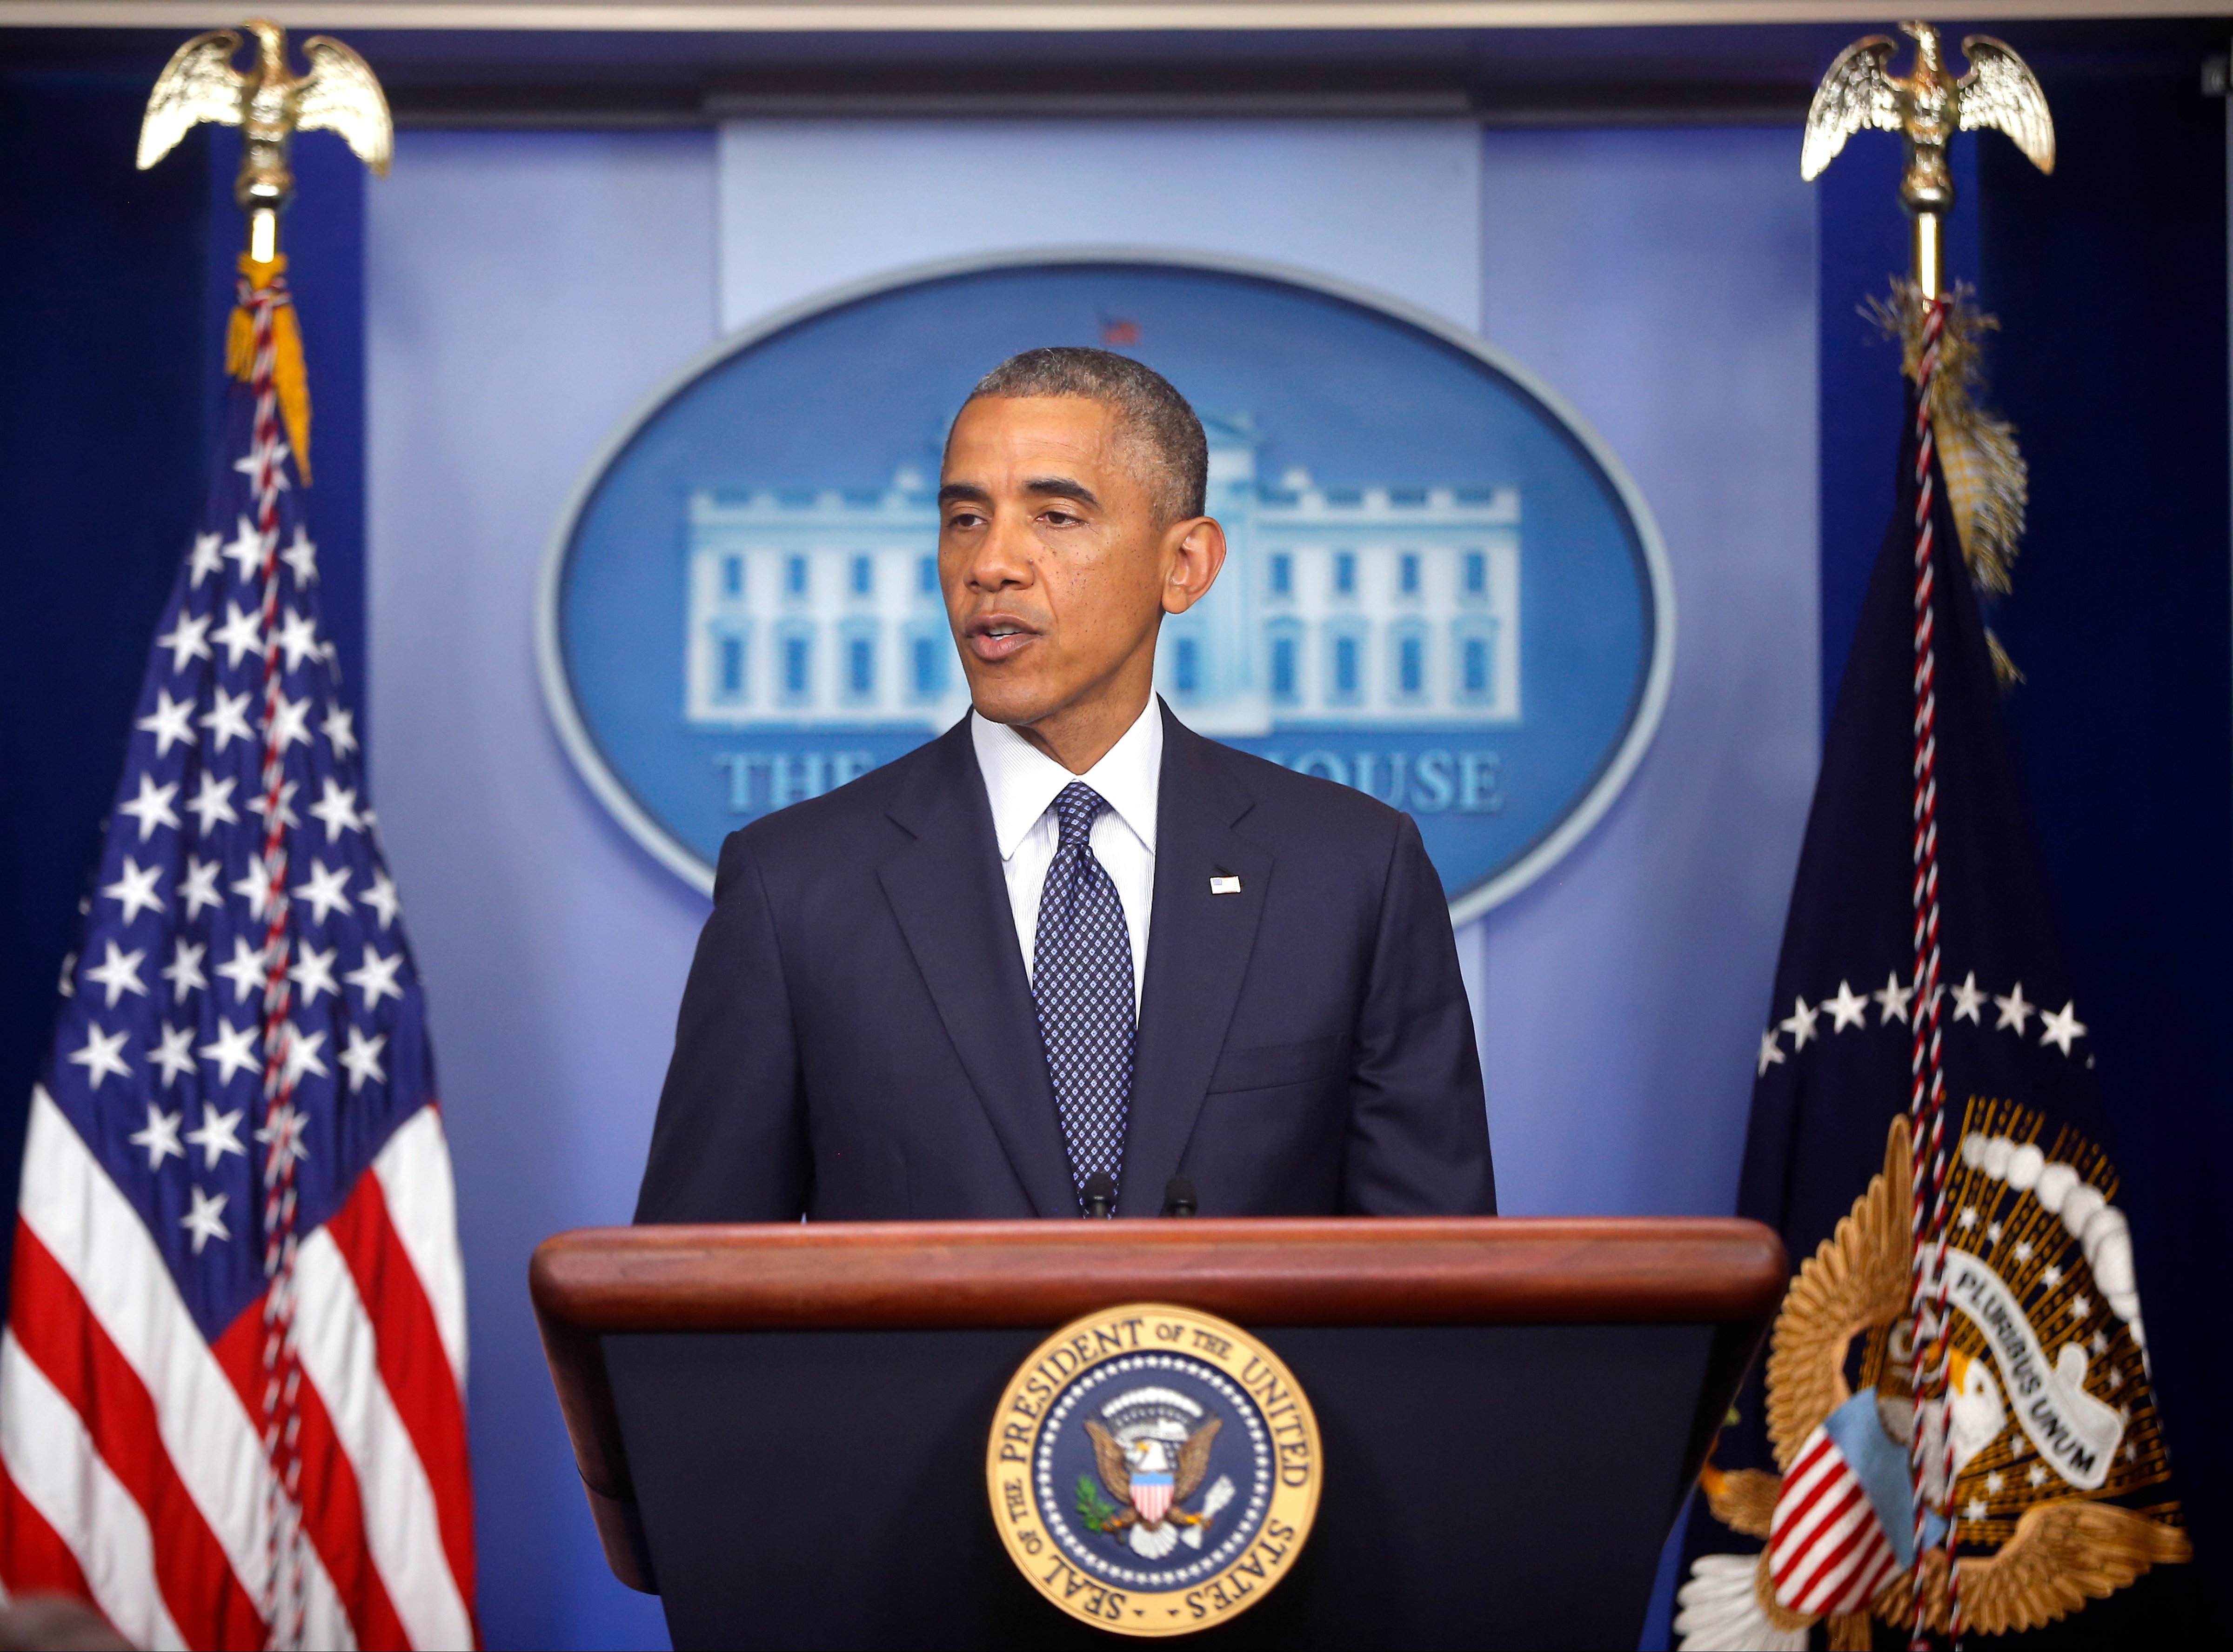 President Barack Obama speaks about foreign policy and escalating sanctions against Russia in response to the crisis in Ukraine in the James Brady Press Briefing Room at the White House in Washington DC, on July 16, 2014. (Charles Dharapak—AP)